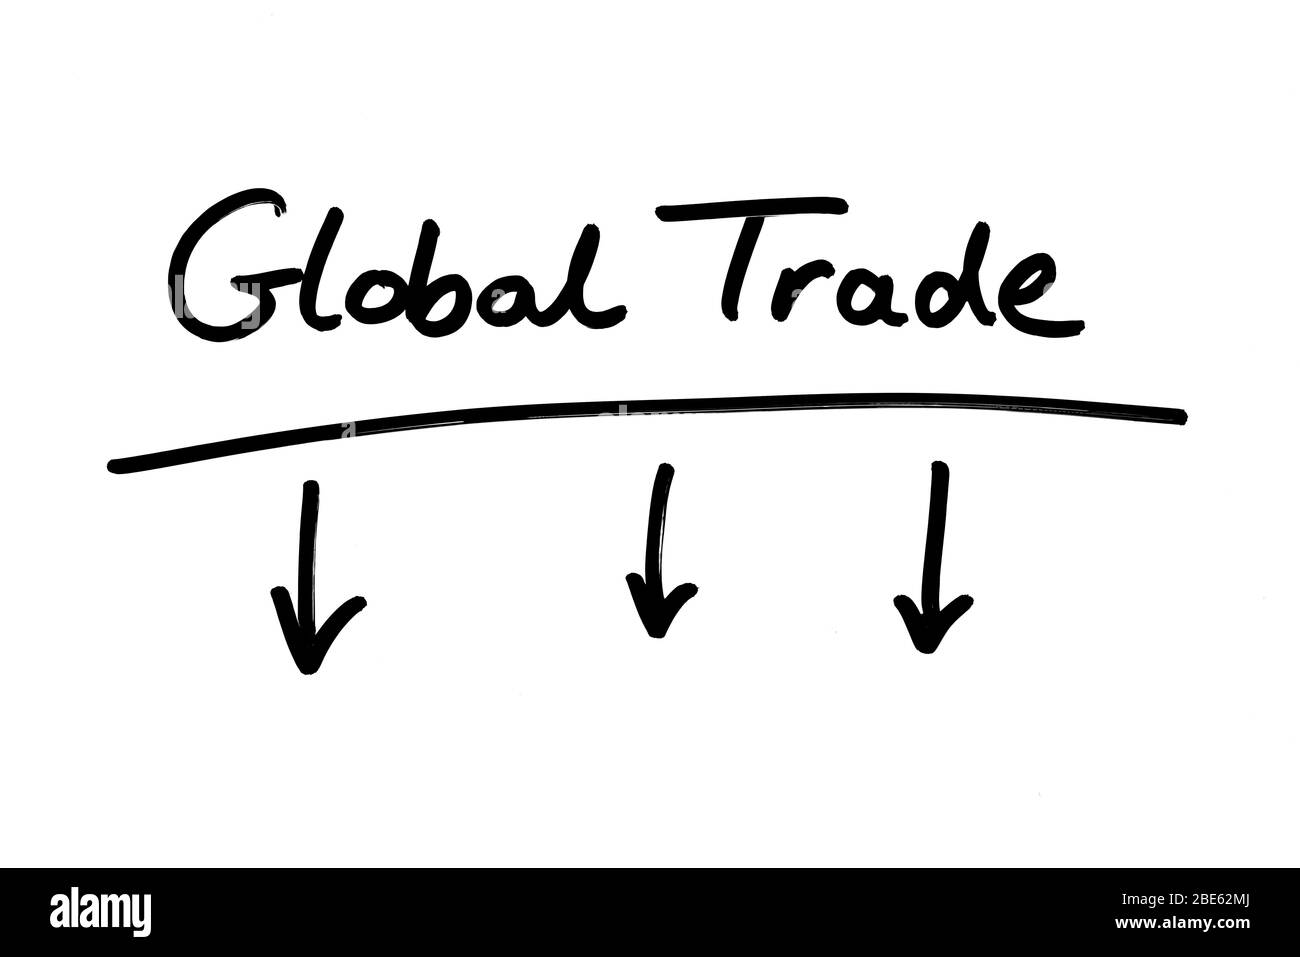 Falling Global Trade handwritten sign on a white background. Stock Photo